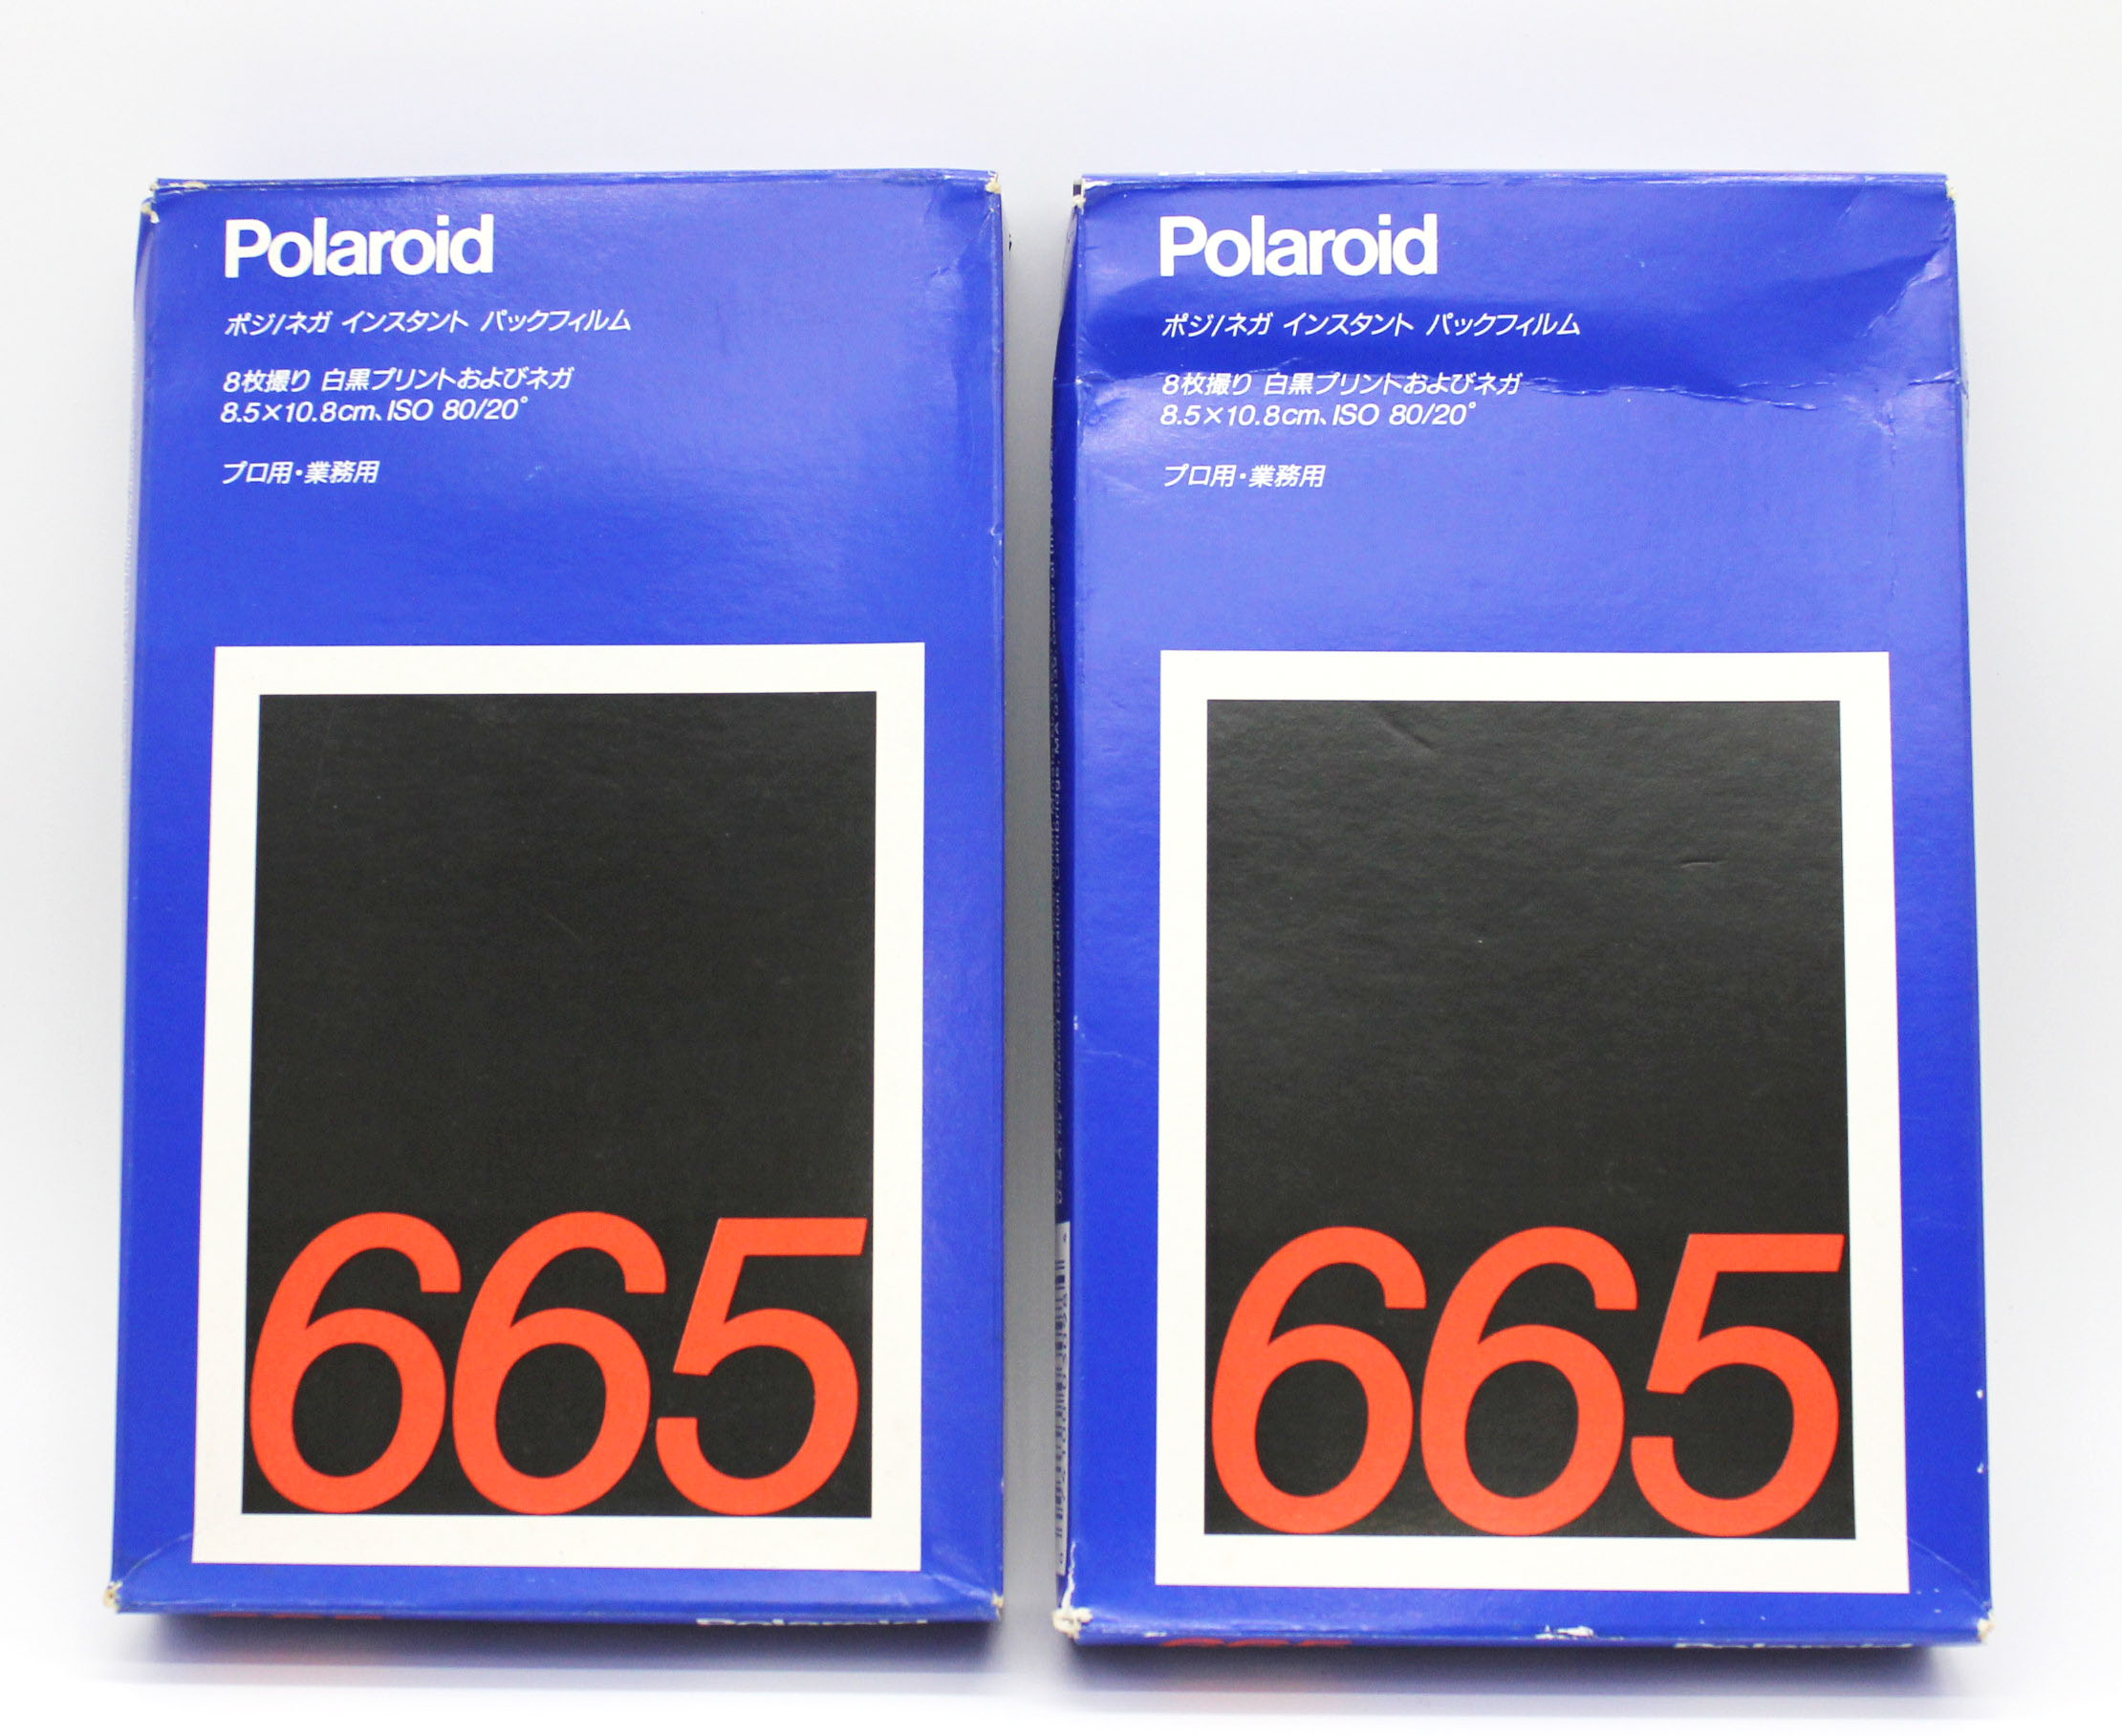  Polaroid 665 Positive / Negative Instant Pack Film (2 Packs) Expired 11/1992 from Japan Photo 0